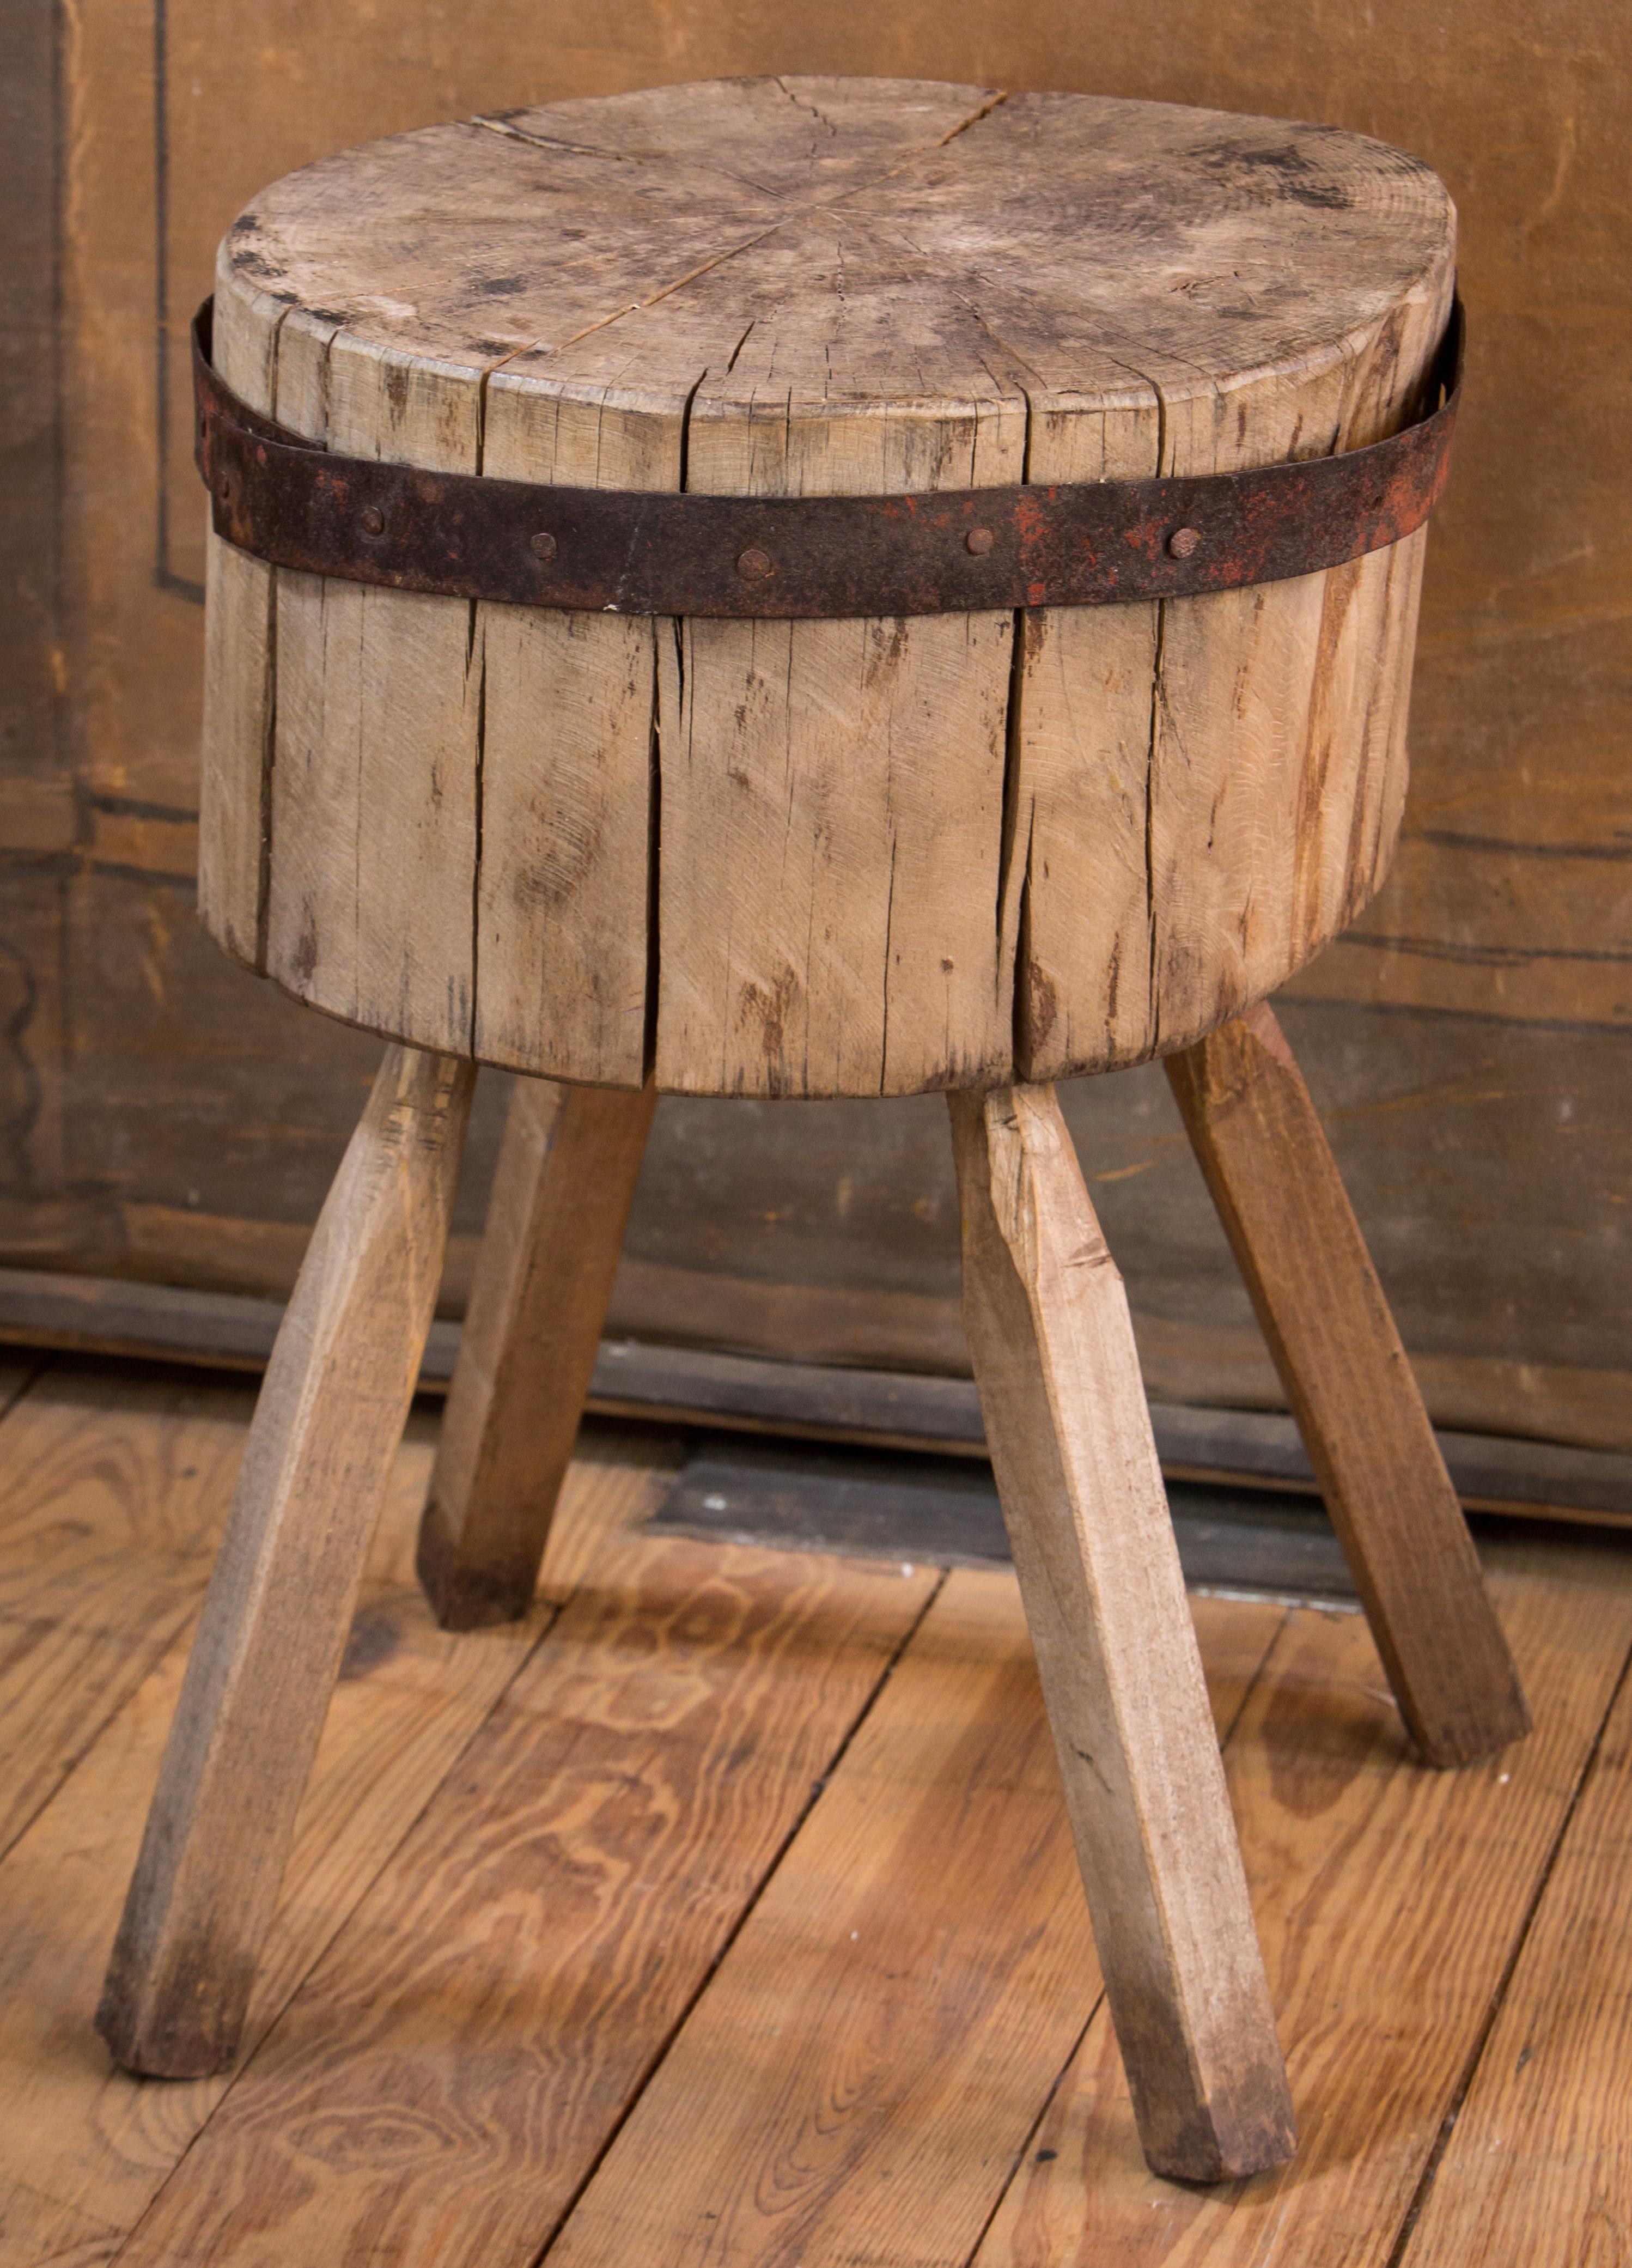 Primitive butcher block (circa 1900) from farmhouse. This charming simple, rustic butcher block makes an interesting end or side table.